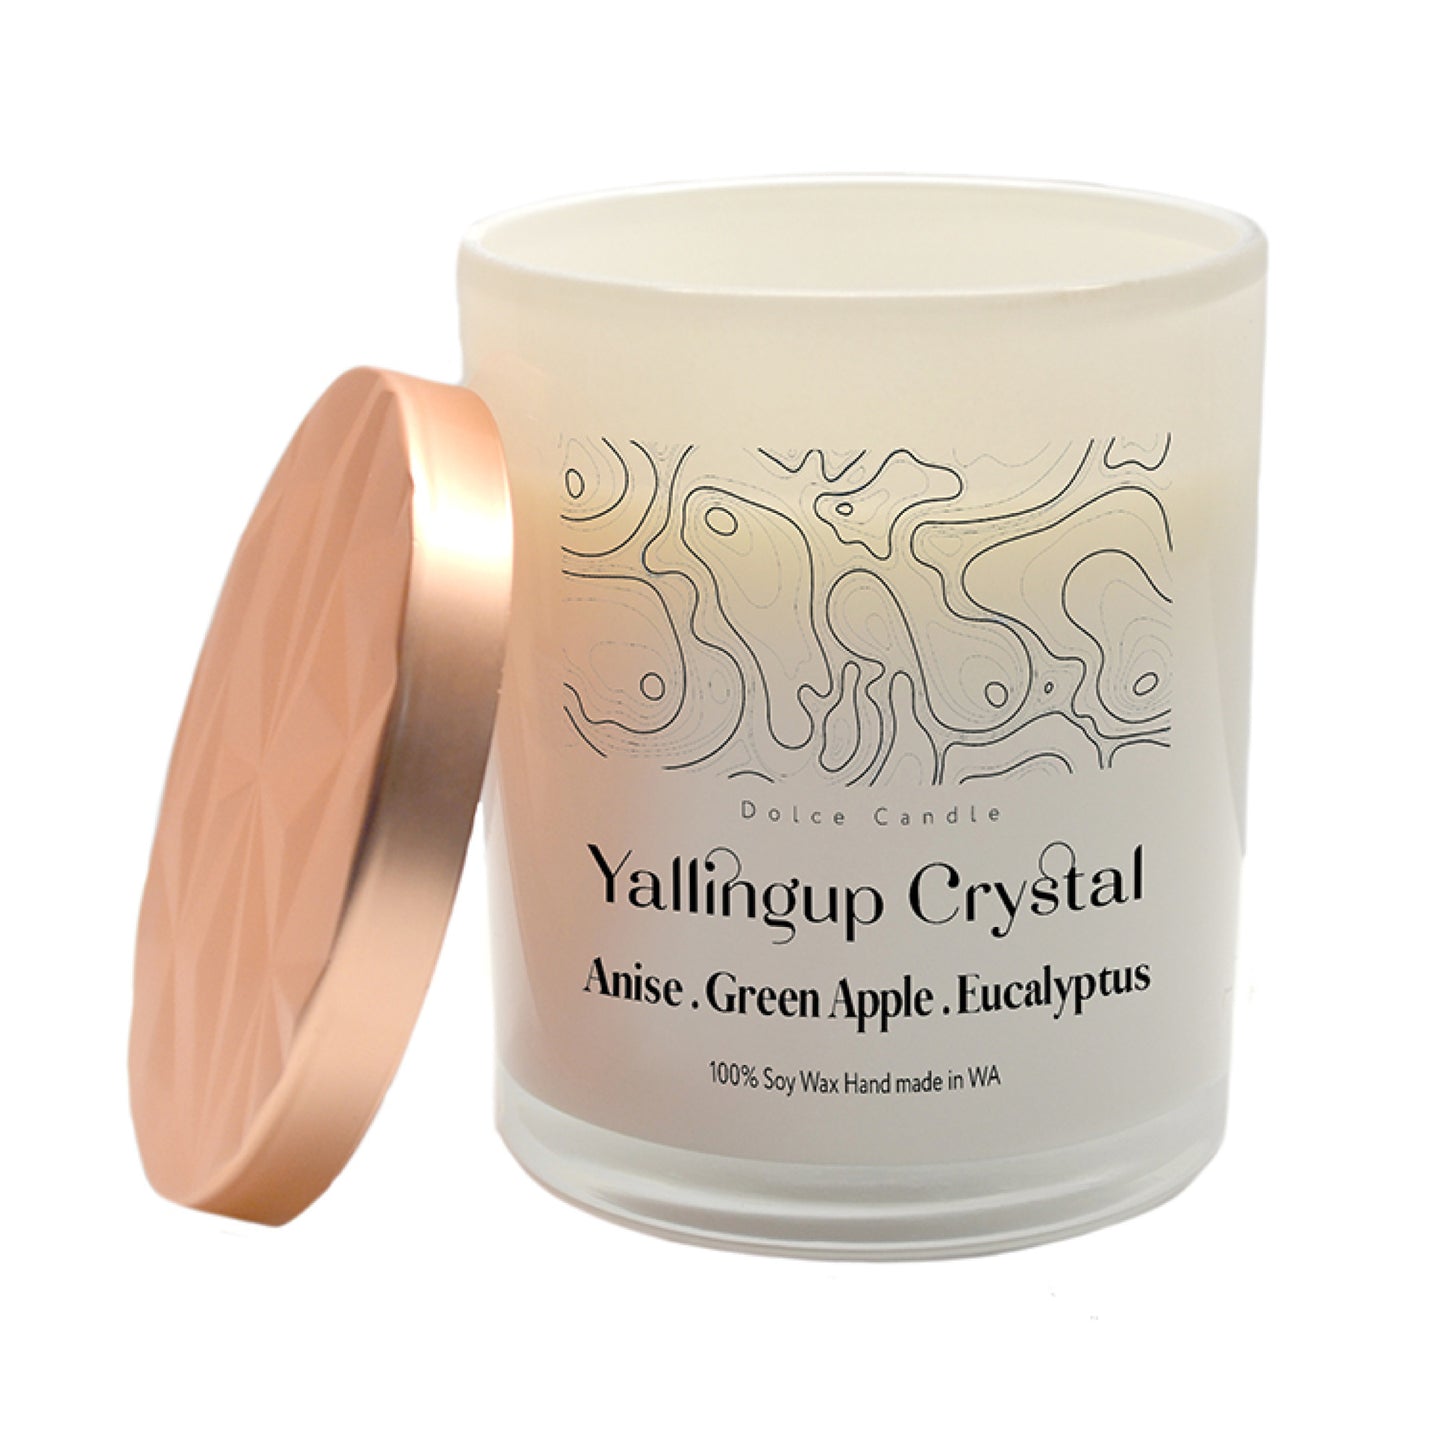 Yallingup Crystal | 300g Candle | Dolce Home | Handmade in W.A.